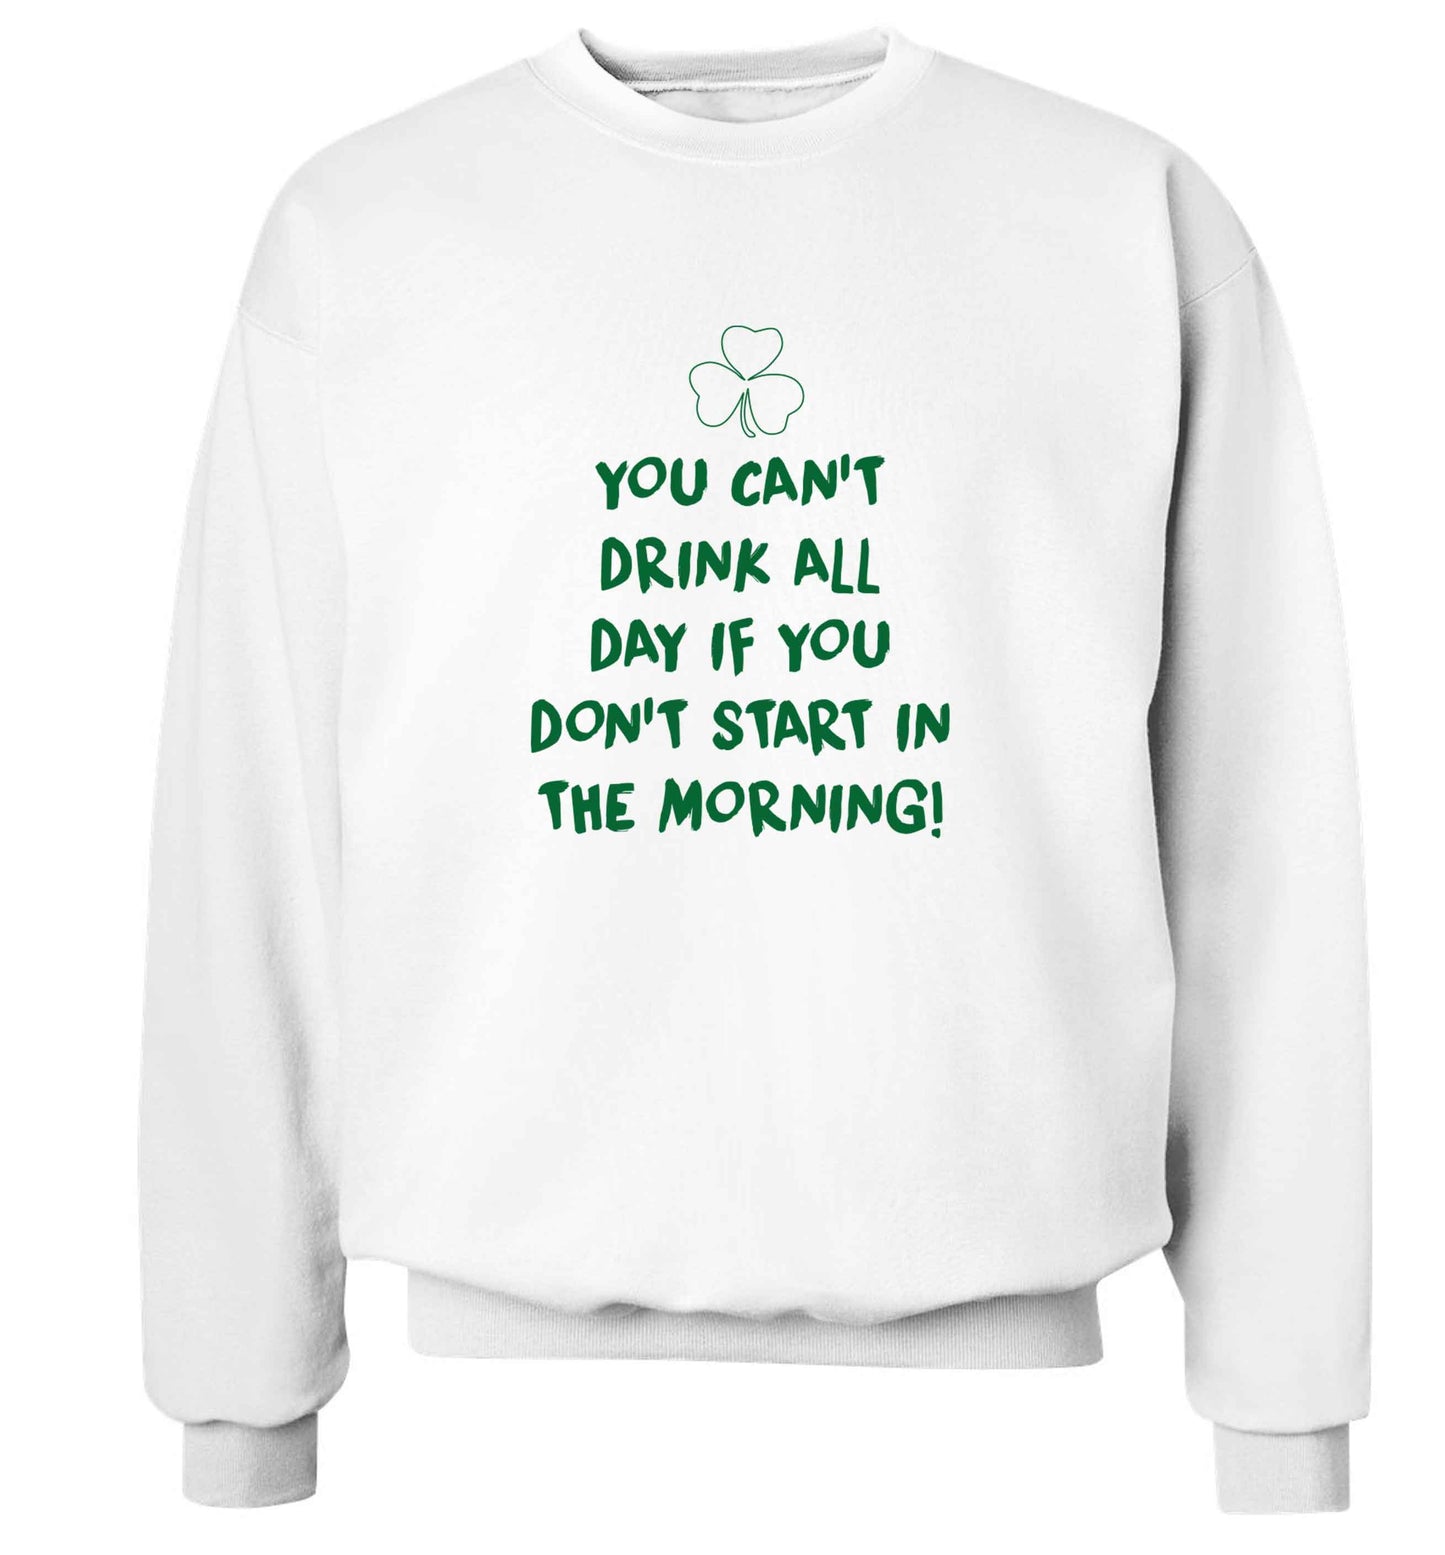 You can't drink all day if you don't start in the morning adult's unisex white sweater 2XL